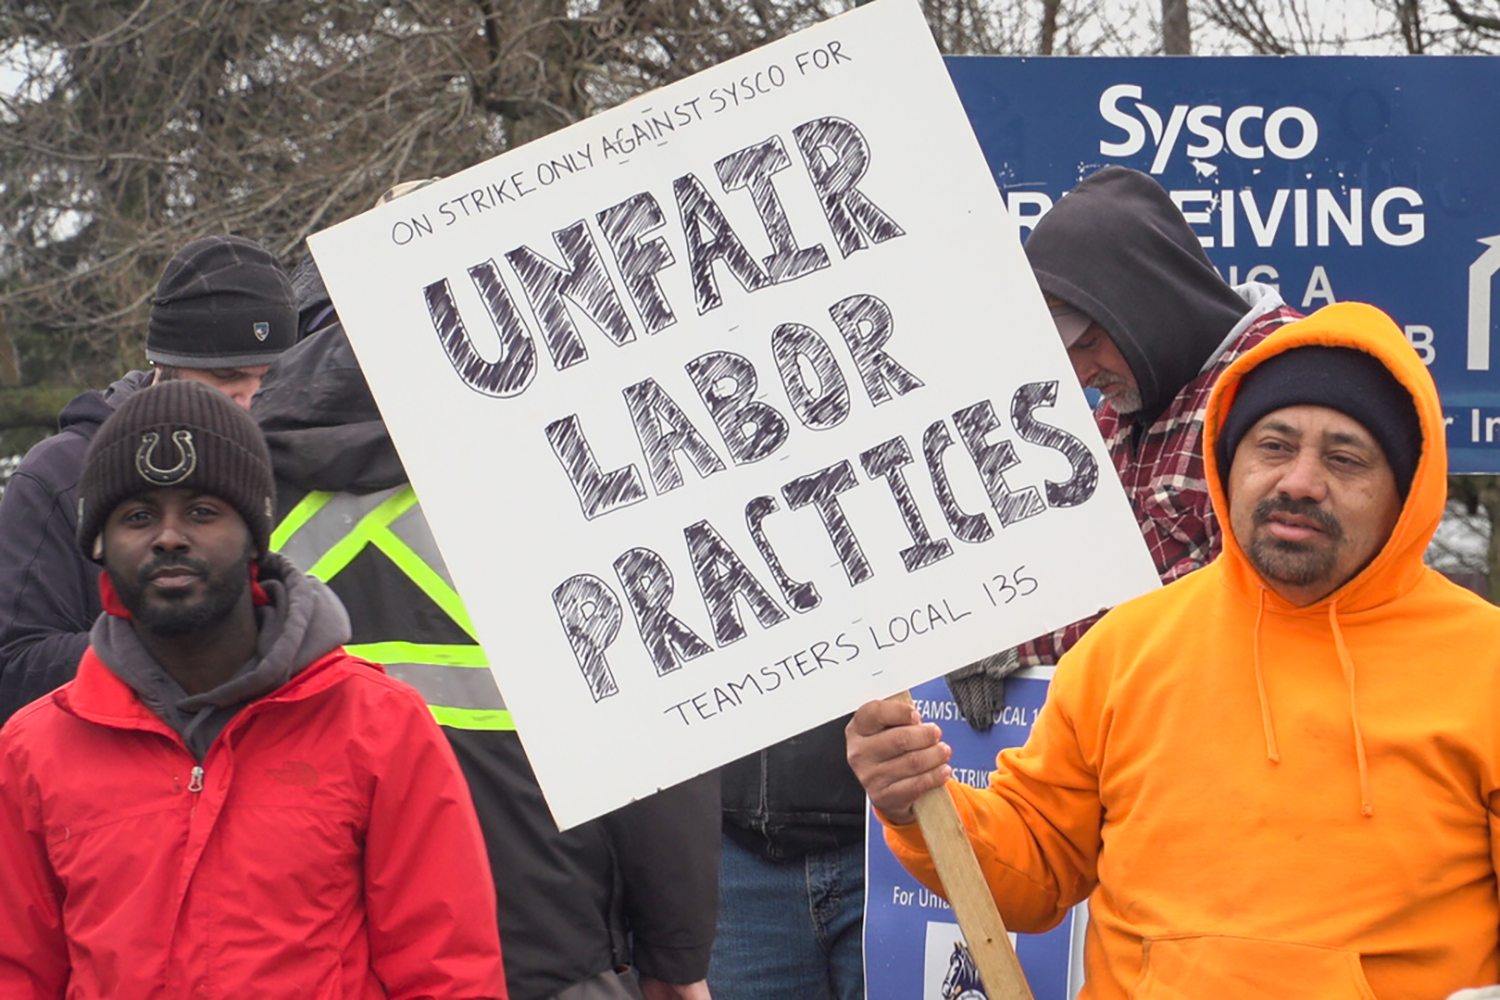 Union Sysco workers remain on strike as rippling financial impacts